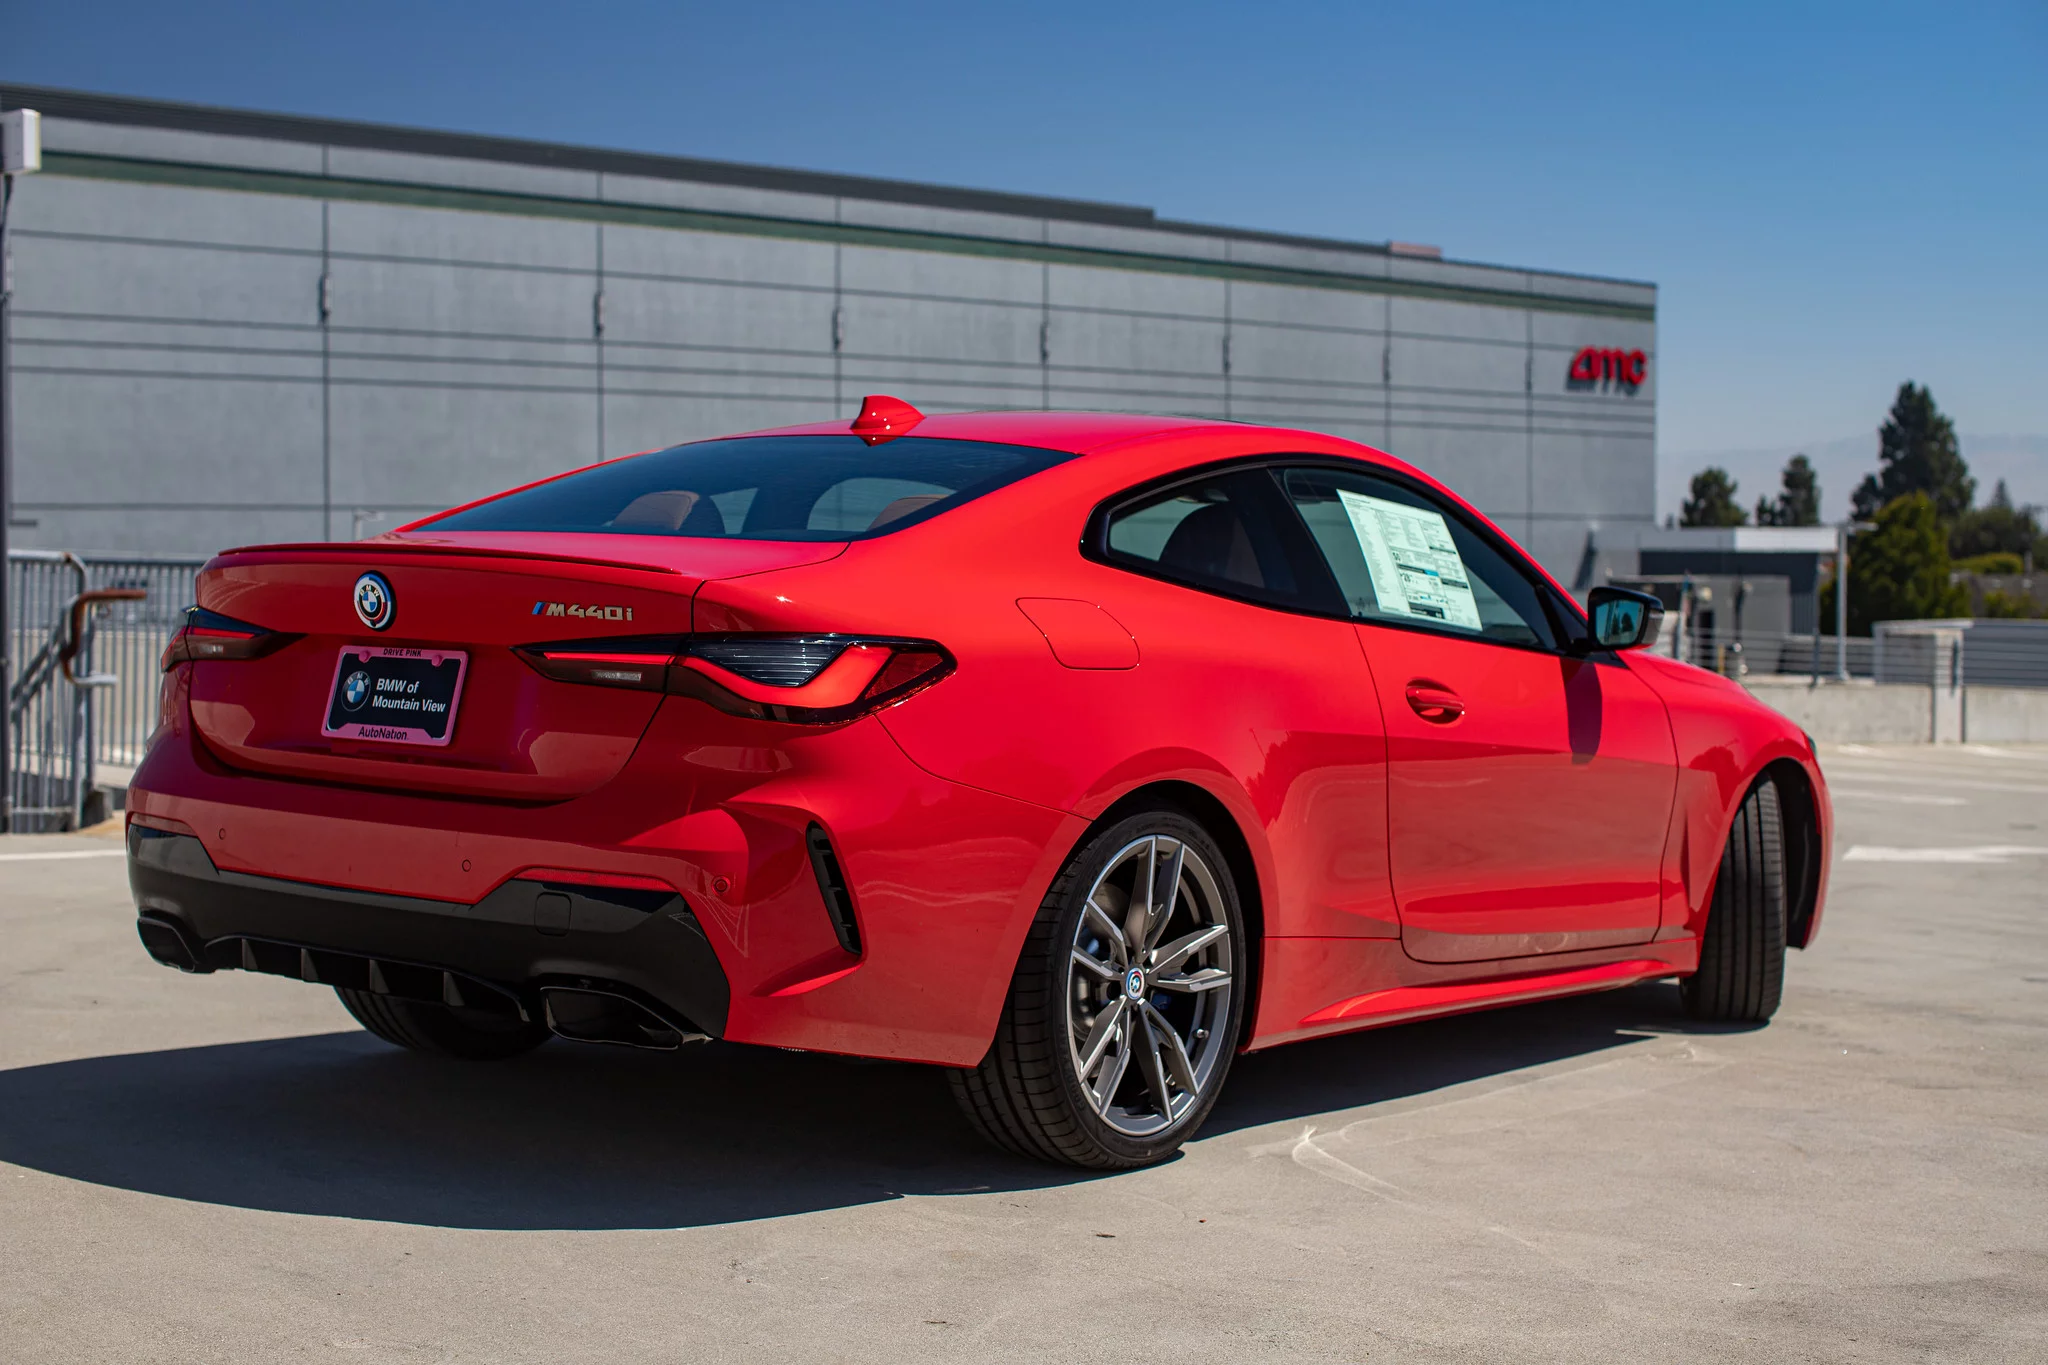 St James Red BMW 4 Series